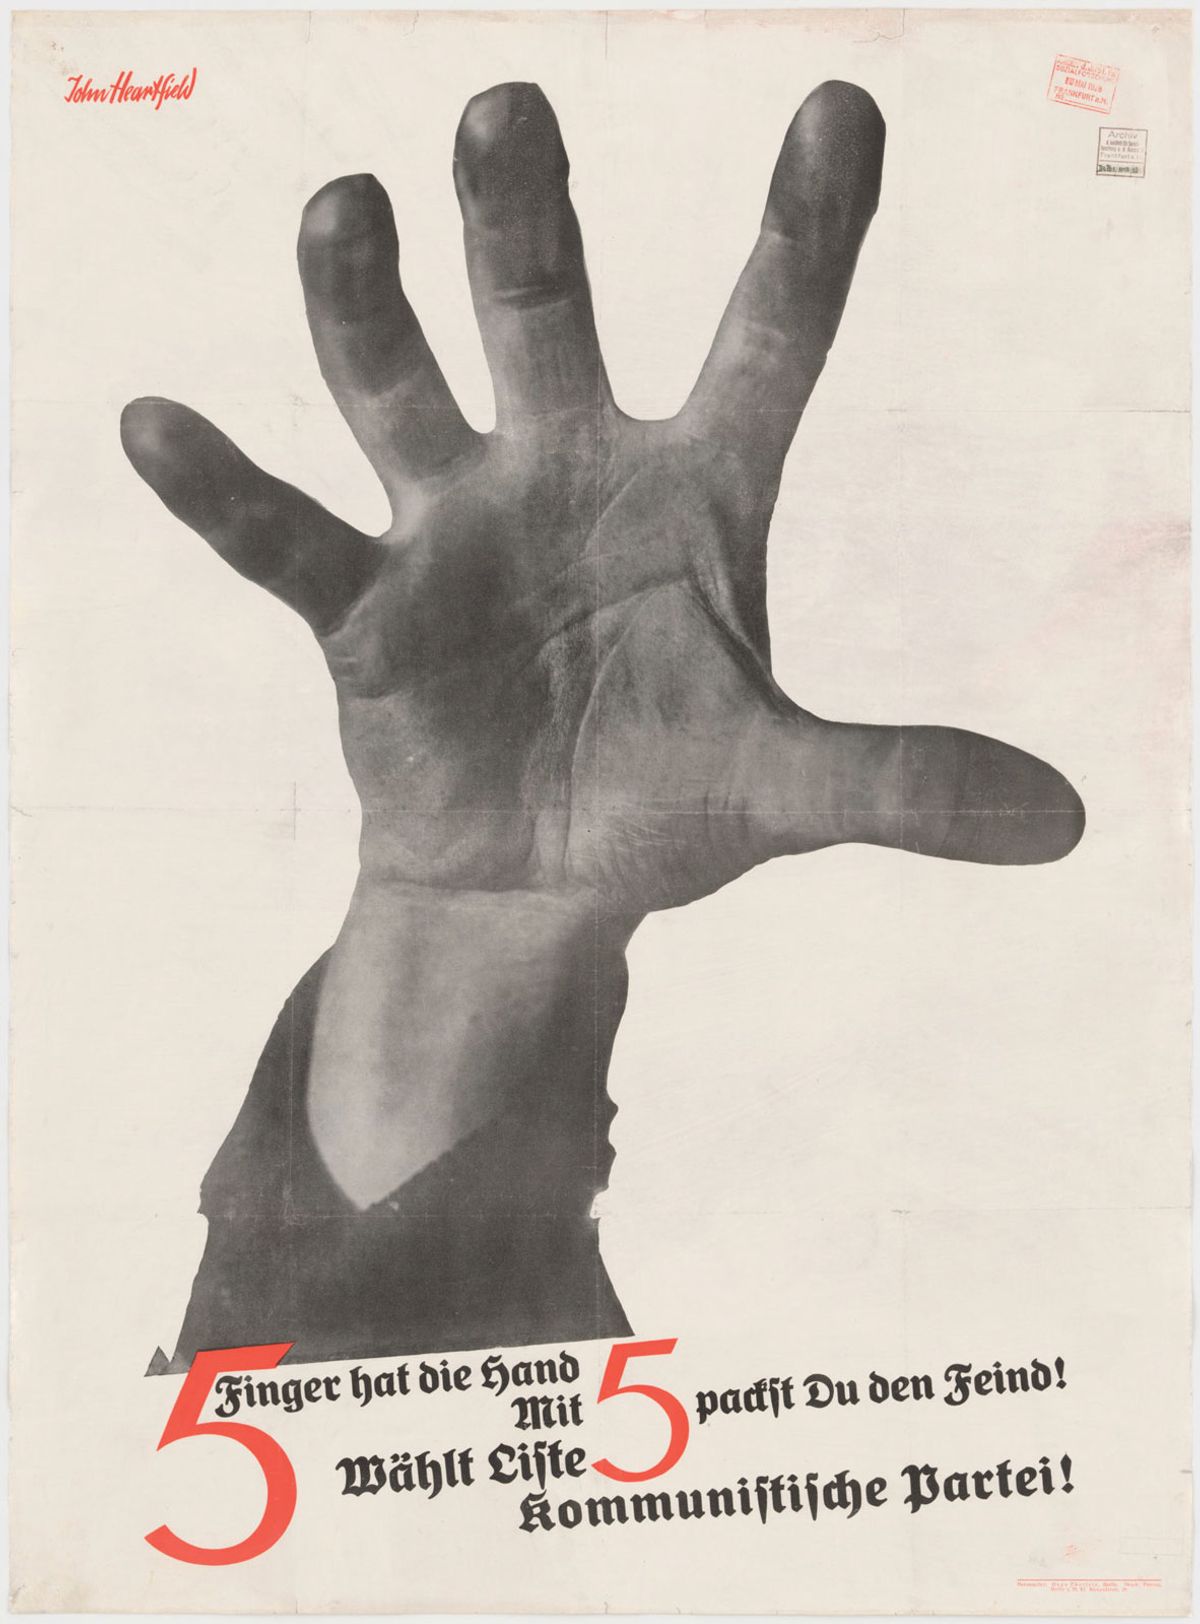 John Heartfield's The Hand Has Five Fingers (1928), a campaign poster for German Communist Party The Museum of Modern Art, New York. The Merrill C. Berman Collection